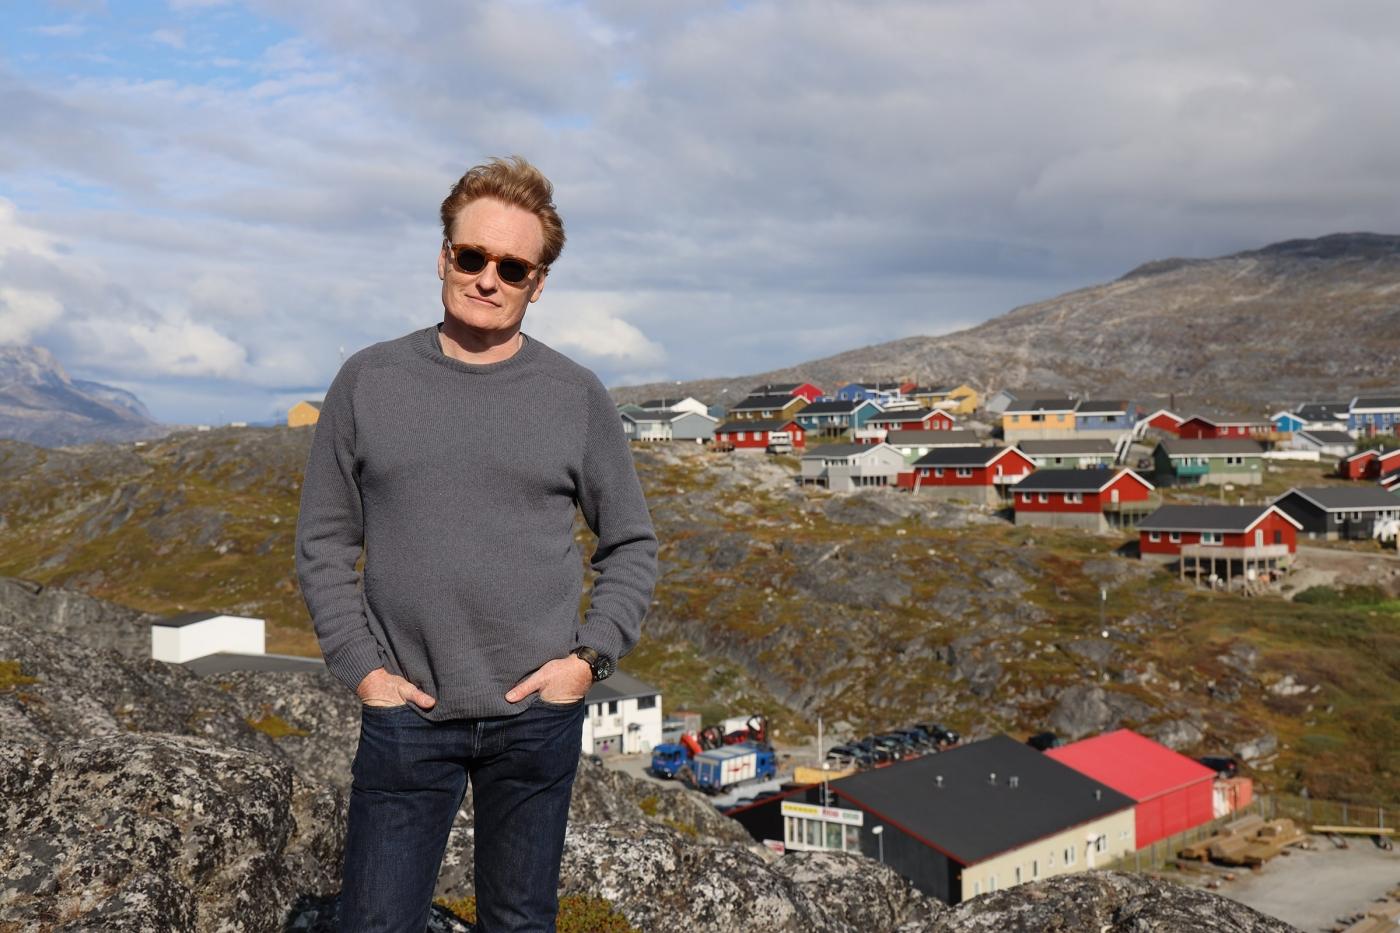 Conan O'Brien and panorama of Nuuk. Photo by Team Coco